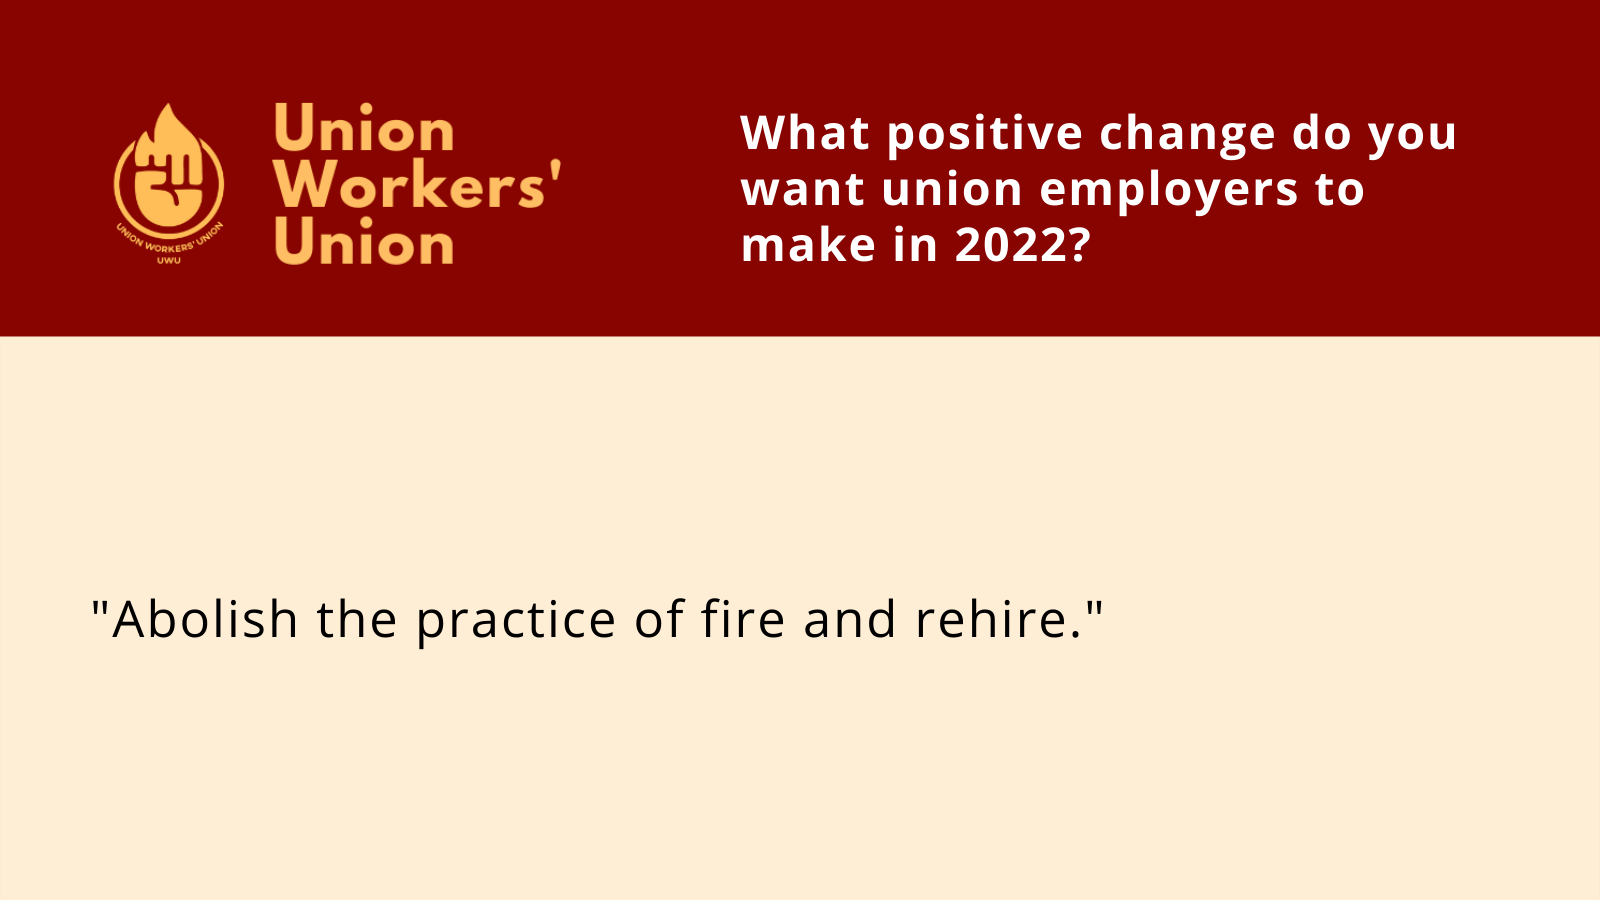 UWU logo next to the question, what positive change do you want union employers to make in 2022? Member response: Abolish the practice of fire and rehire.